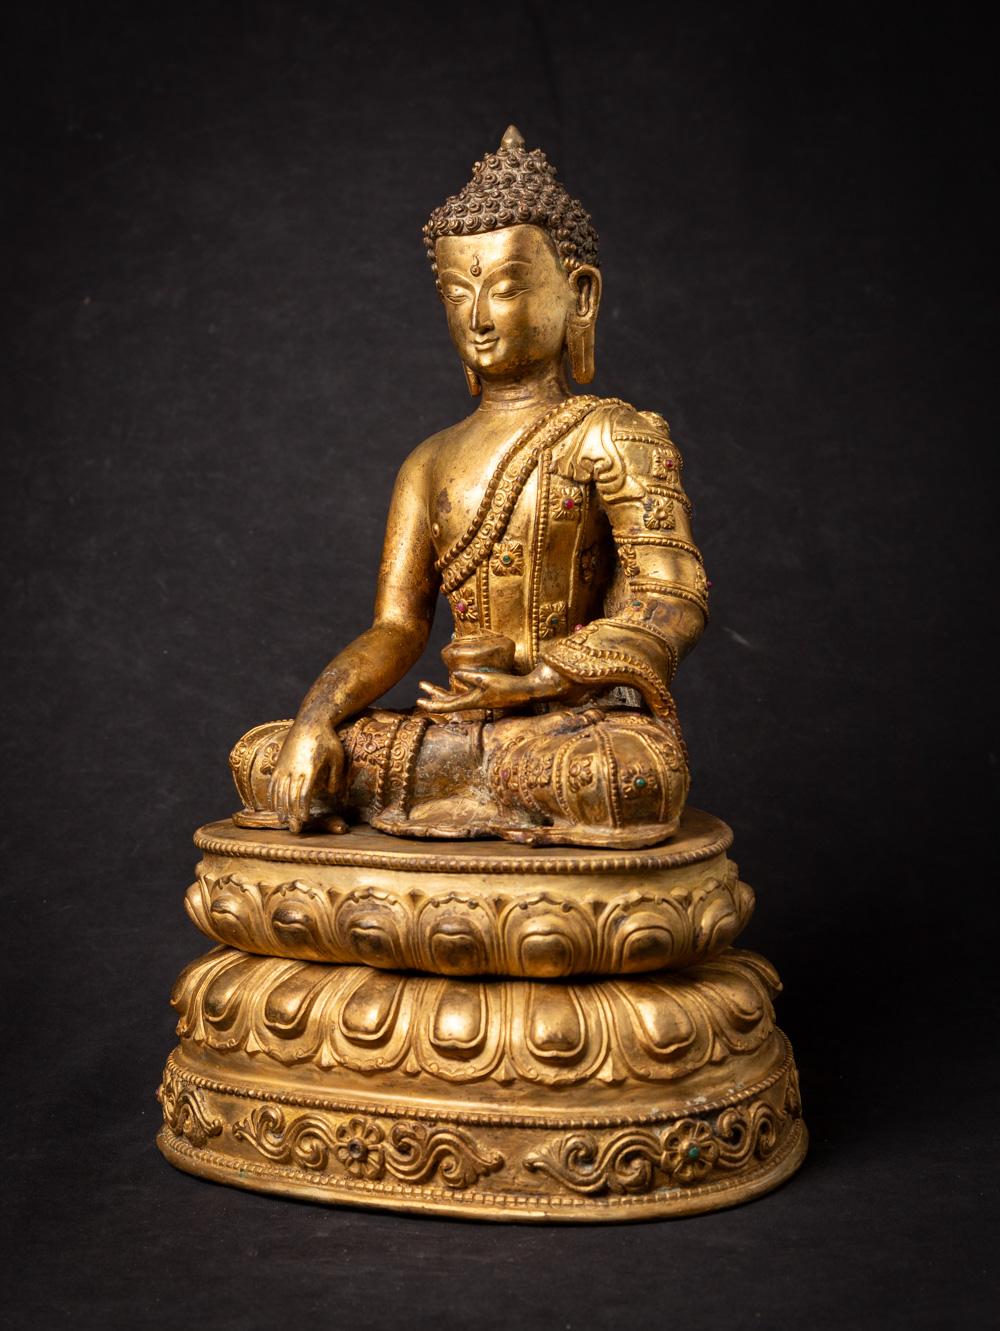 The old bronze Nepali Buddha statue you've described is a captivating and intricately detailed work of art. Crafted from bronze and originating from Nepal, this statue showcases both artistic skill and spiritual significance.

Standing at 38.5 cm in